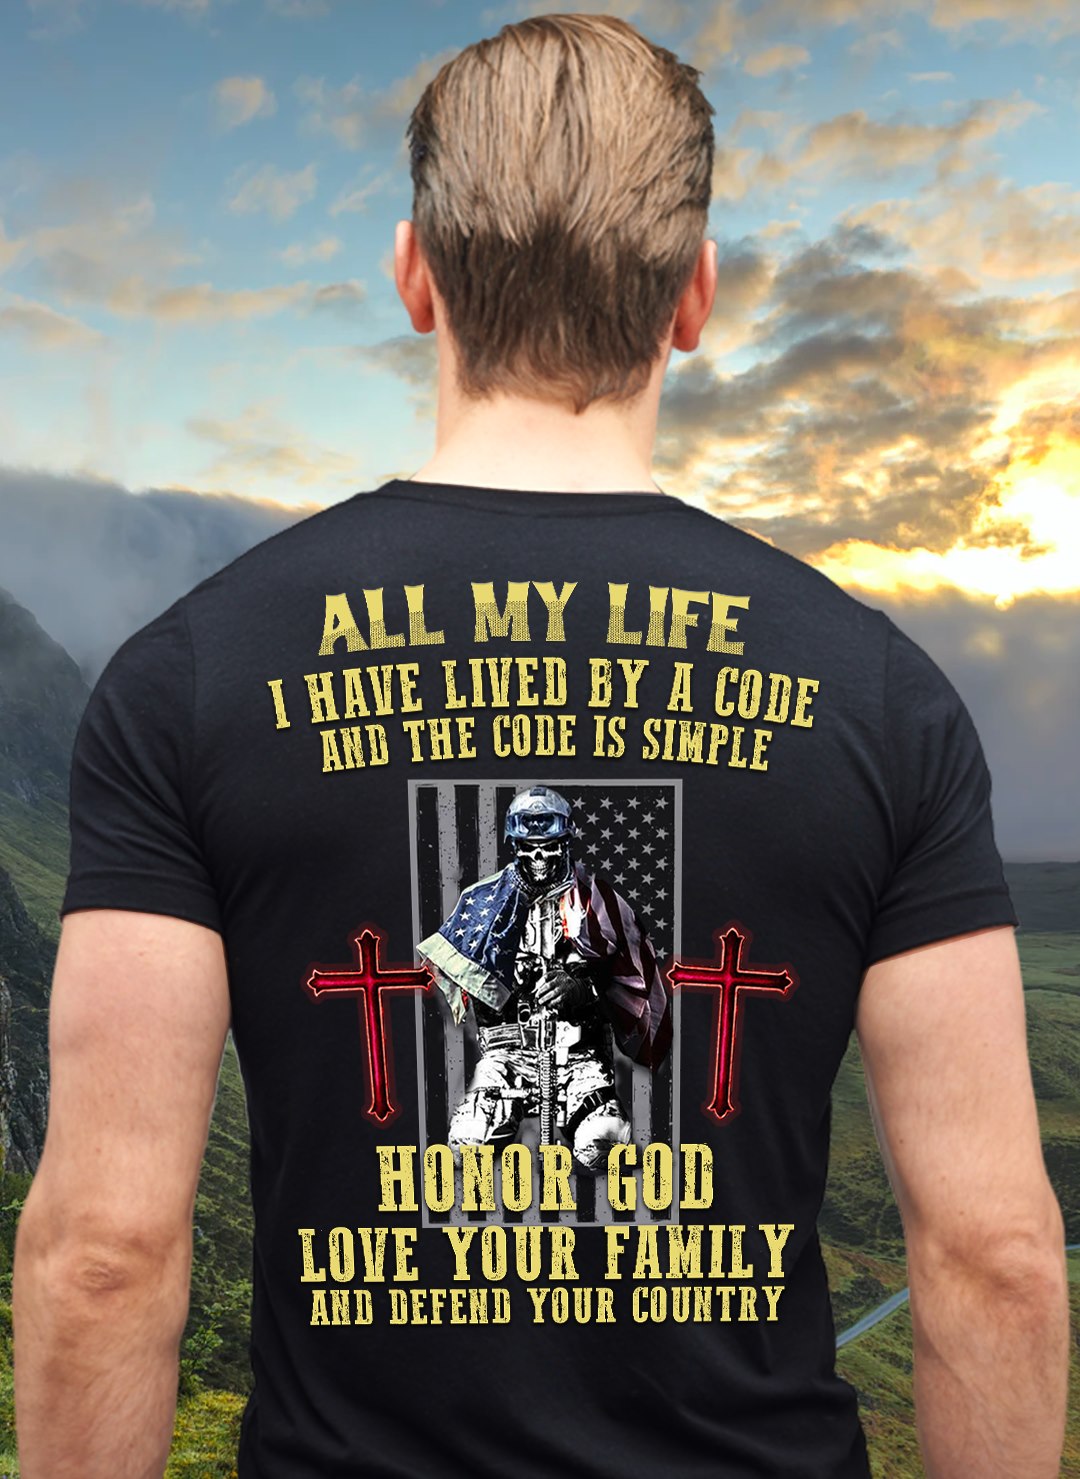 All my life I have lived by a code and the code is simple - Honor god